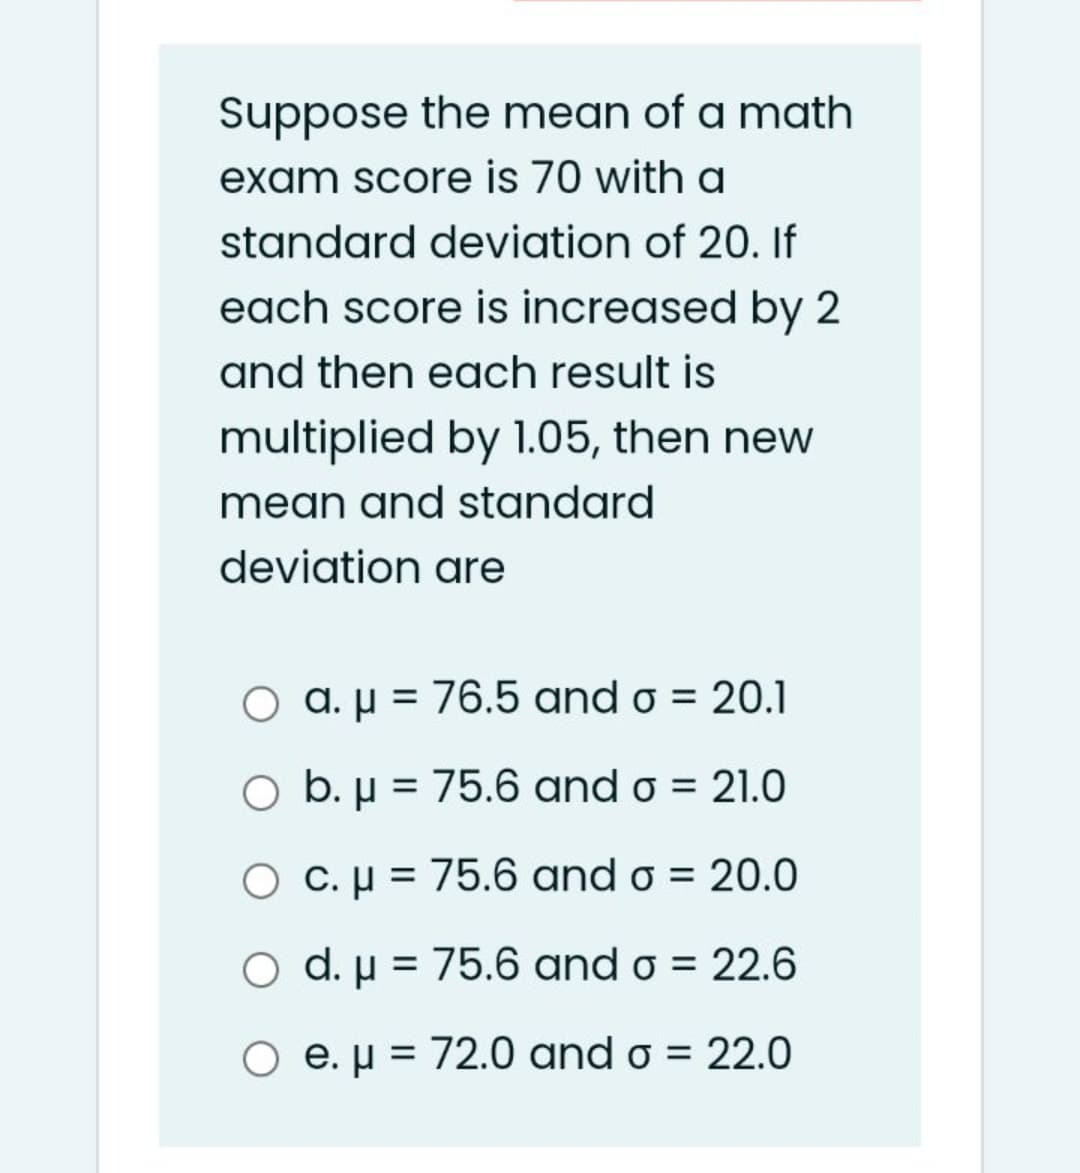 Suppose the mean of a math
exam score is 70 with a
standard deviation of 20. If
each score is increased by 2
and then each result is
multiplied by 1.05, then new
mean and standard
deviation are
O a. µ = 76.5 and o = 20.1
O b. µ = 75.6 and o = 21.0
O C.µ = 75.6 and o = 20.0
d. µ = 75.6 and o = 22.6
O e. µ = 72.0 and o = 22.0
